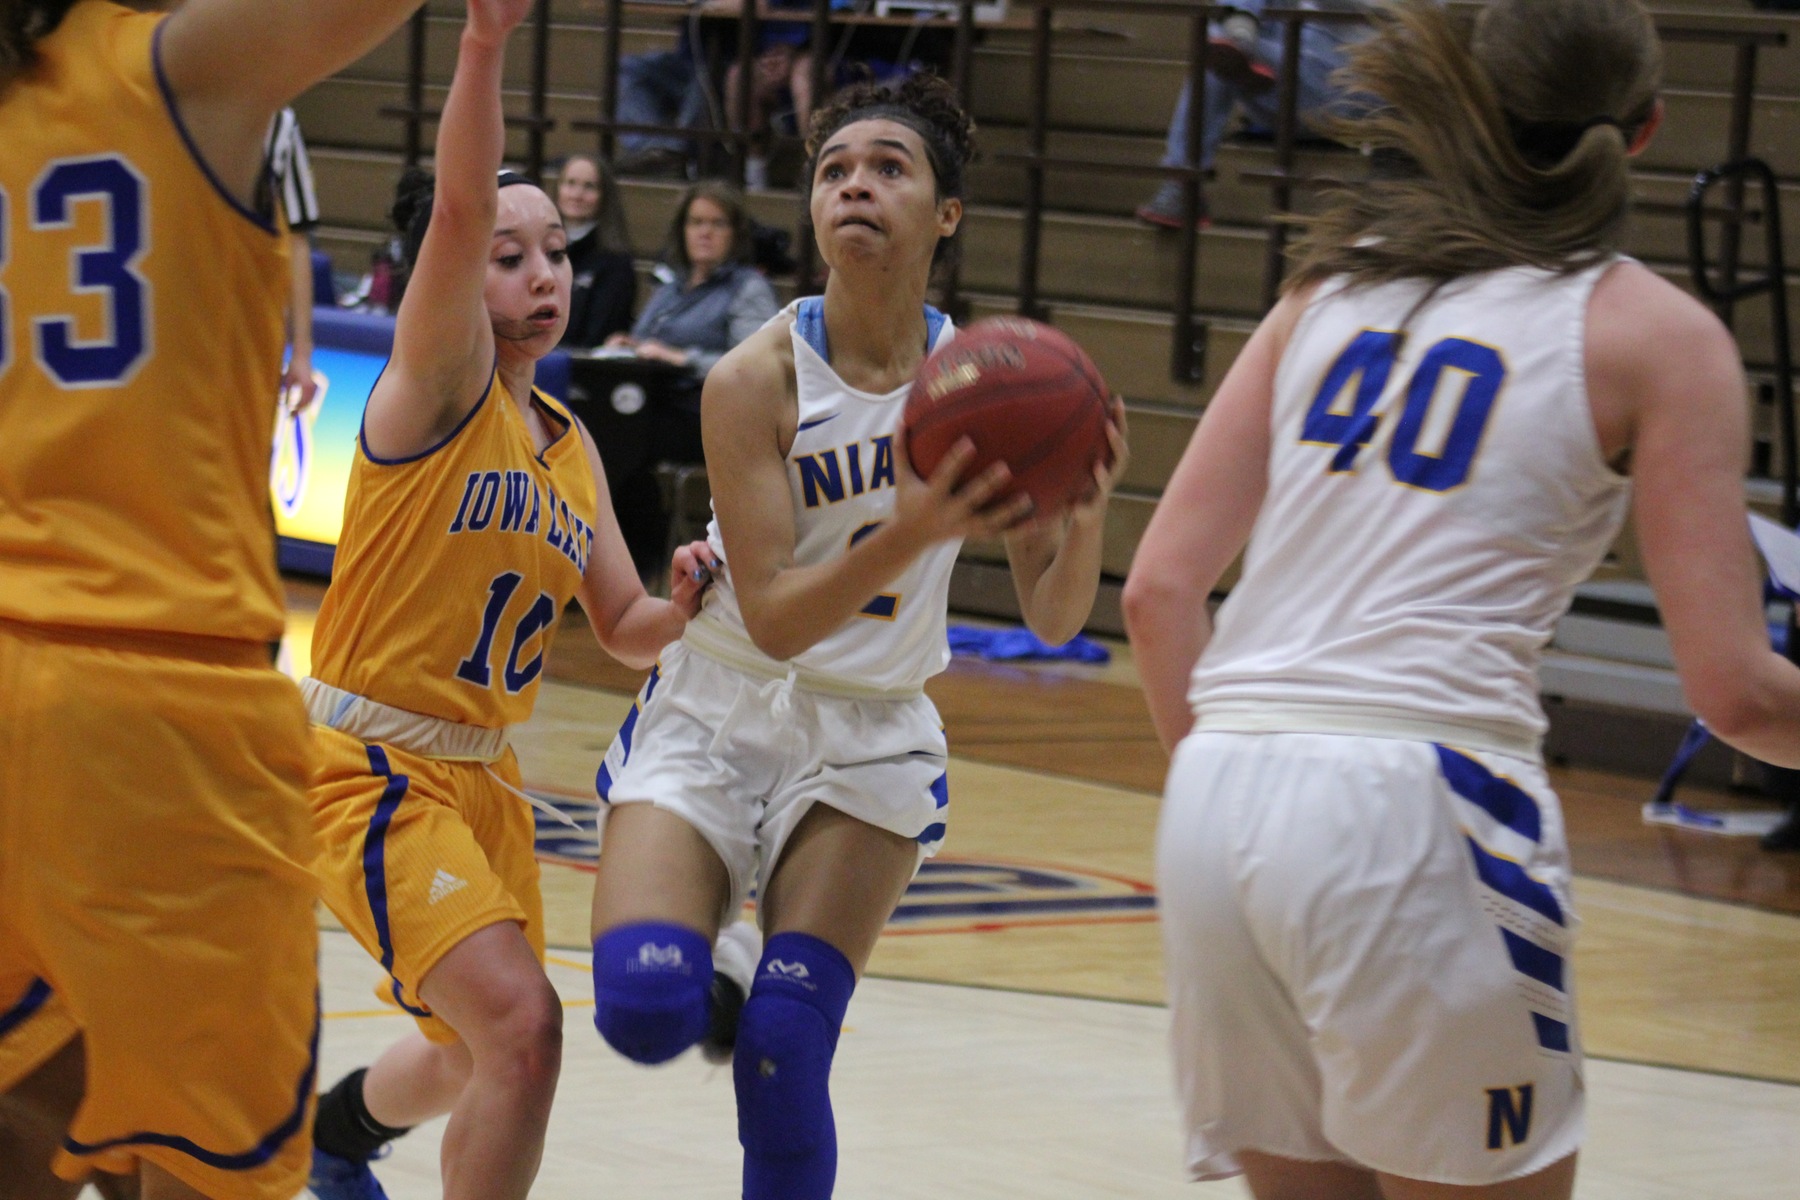 NIACC's Mikayla Homola drives to the basket for a layup in the first half of Wednesday's game against Iowa Lakes.